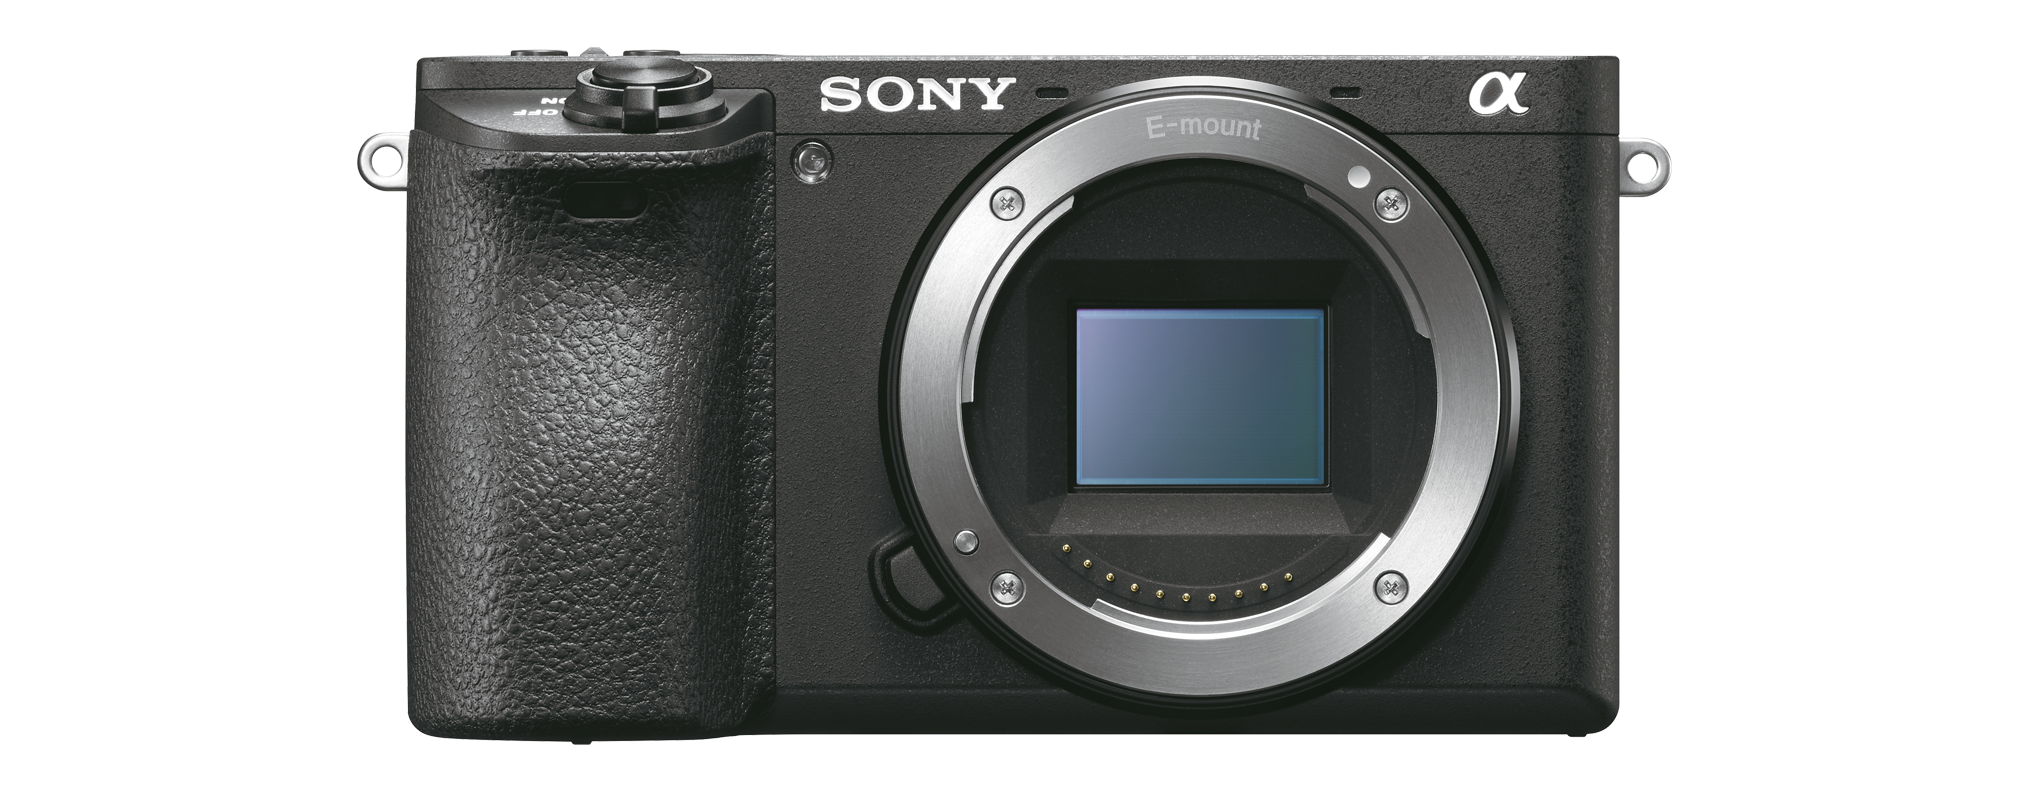 Sony Alpha a6500 Mirrorless Interchangeable-lens Camera - Black - image 1 of 7